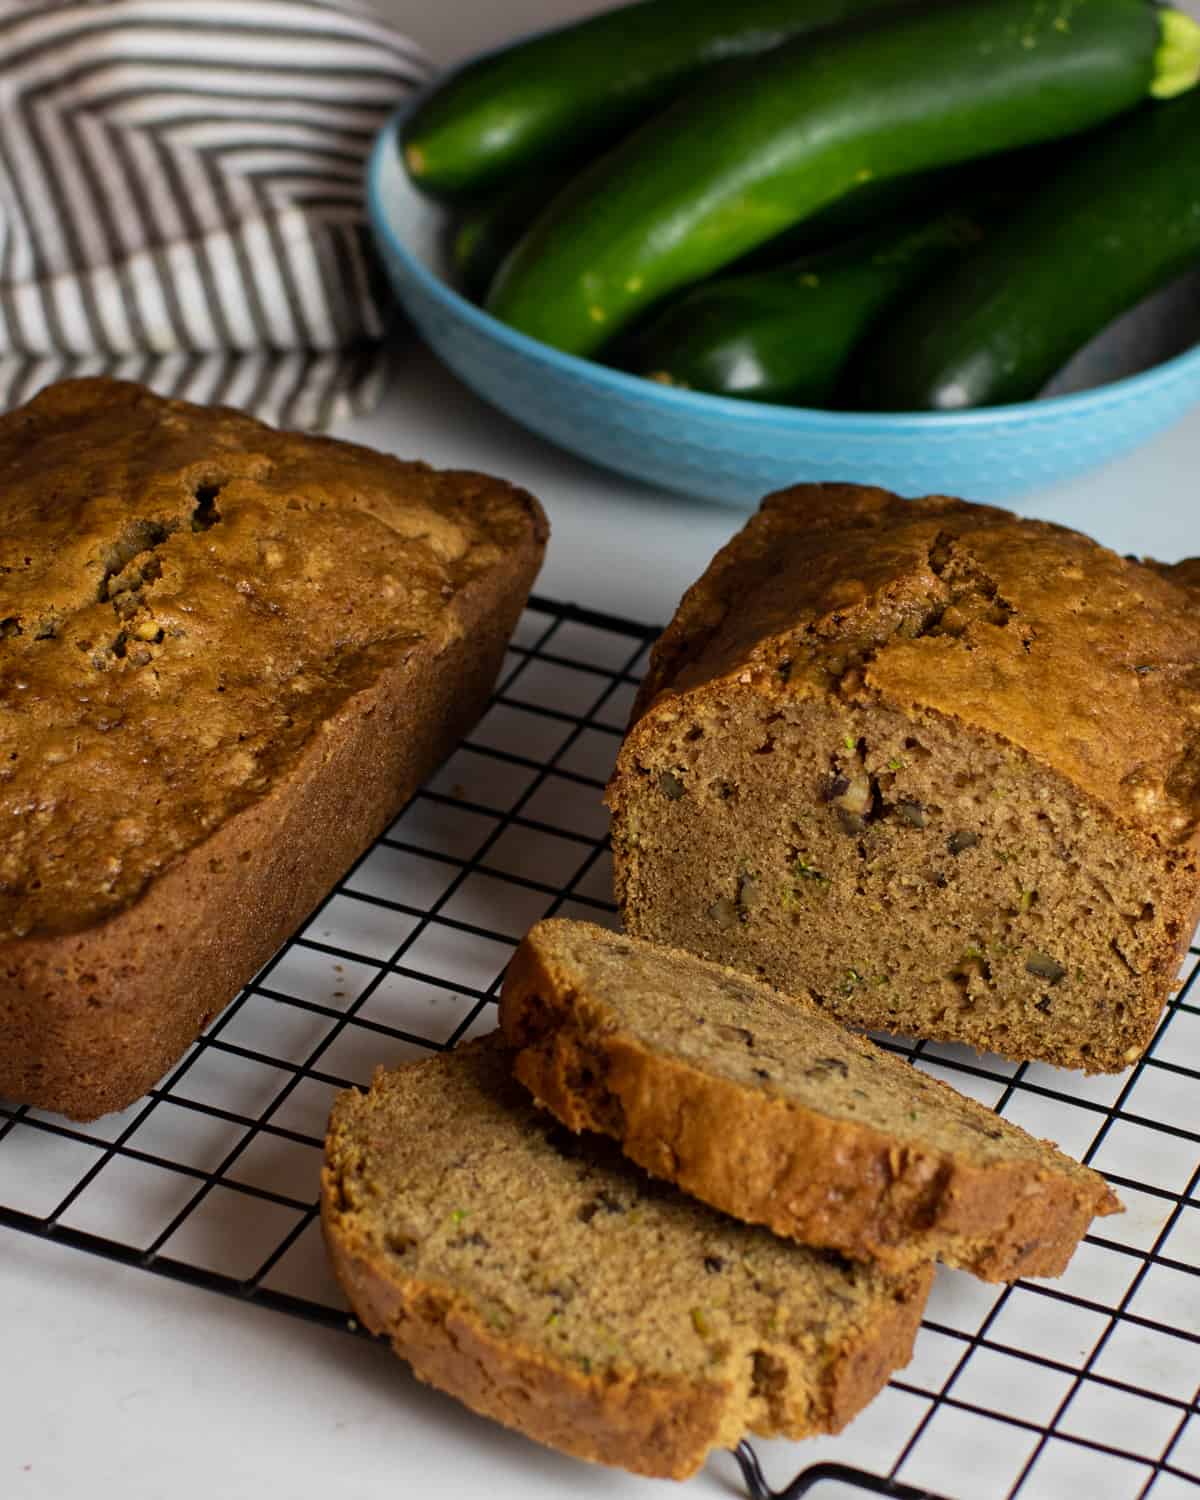 Zucchini bread with two slices cut and placed next to the loaf.